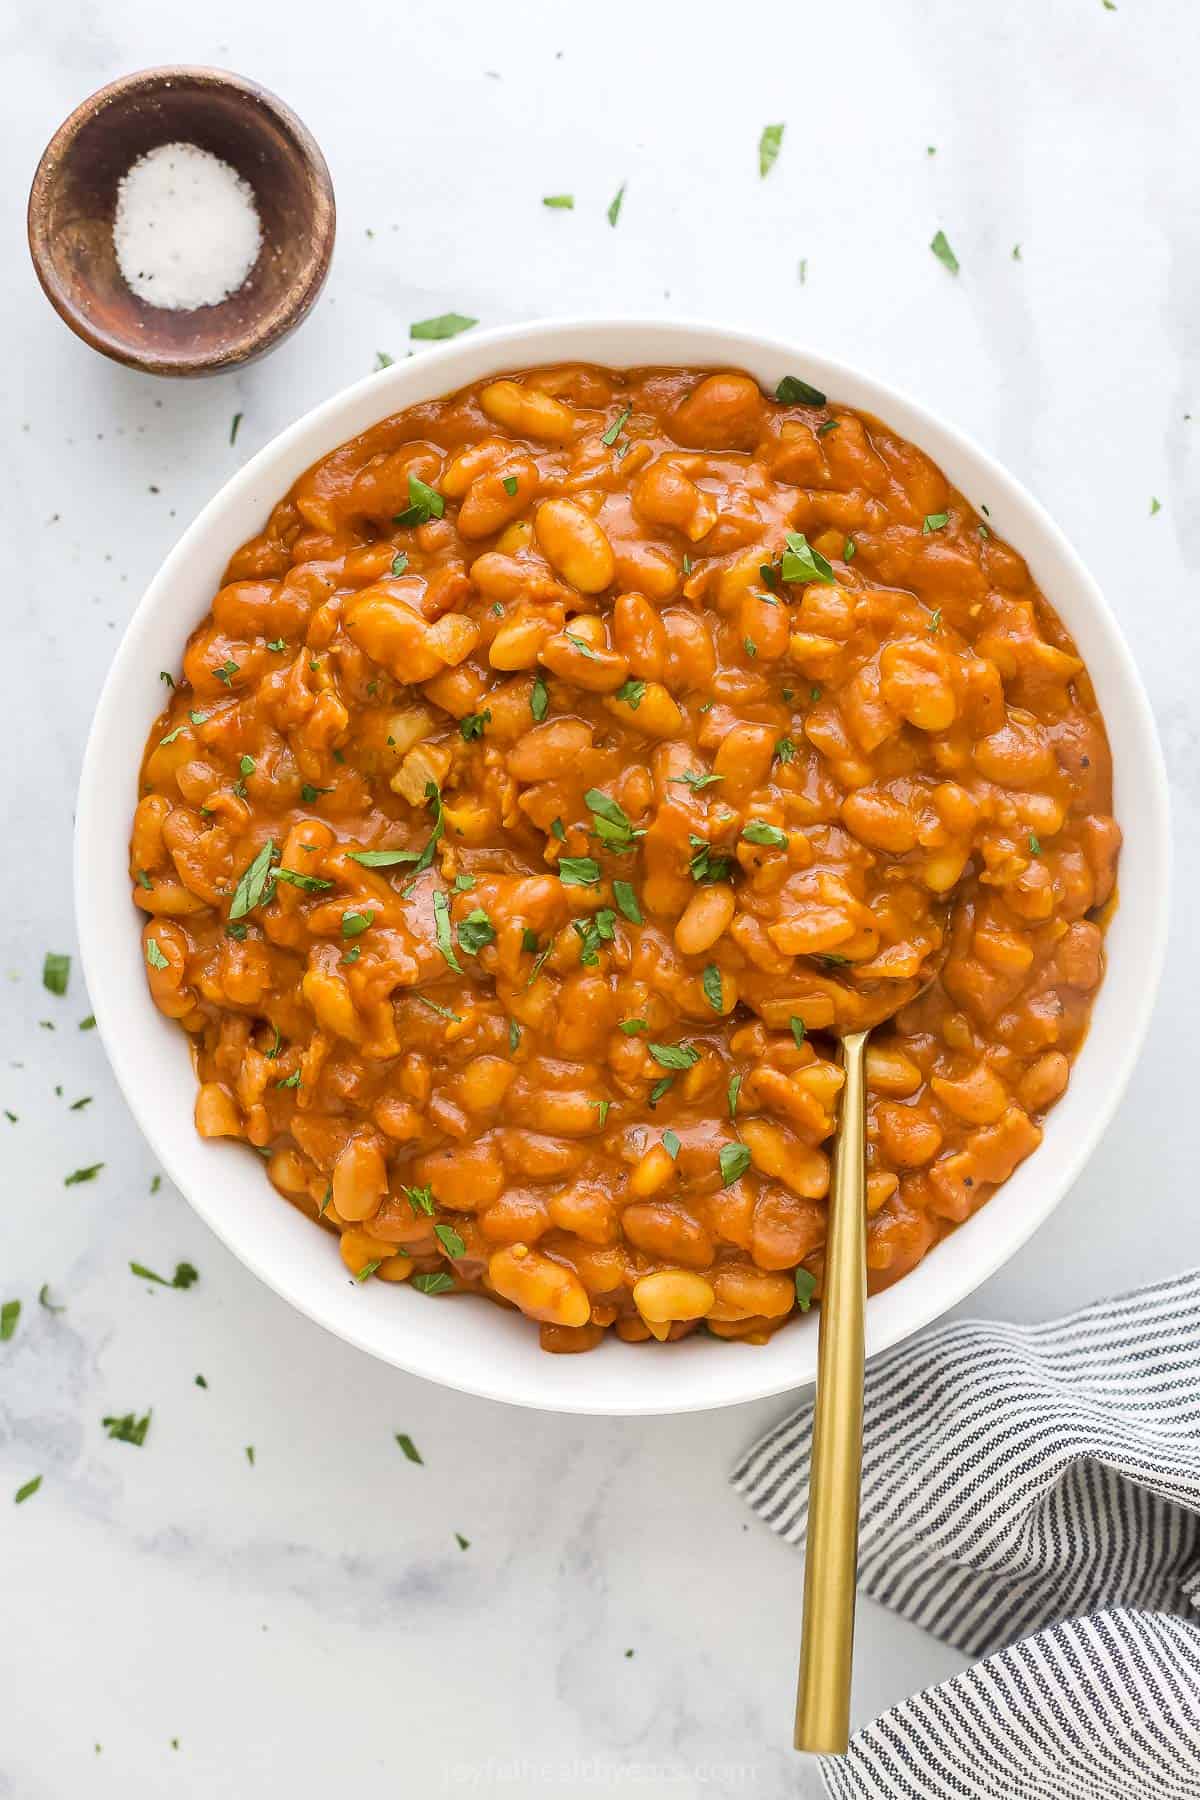 Bacon baked beans in a big bowl with chopped parsley sprinkled on top